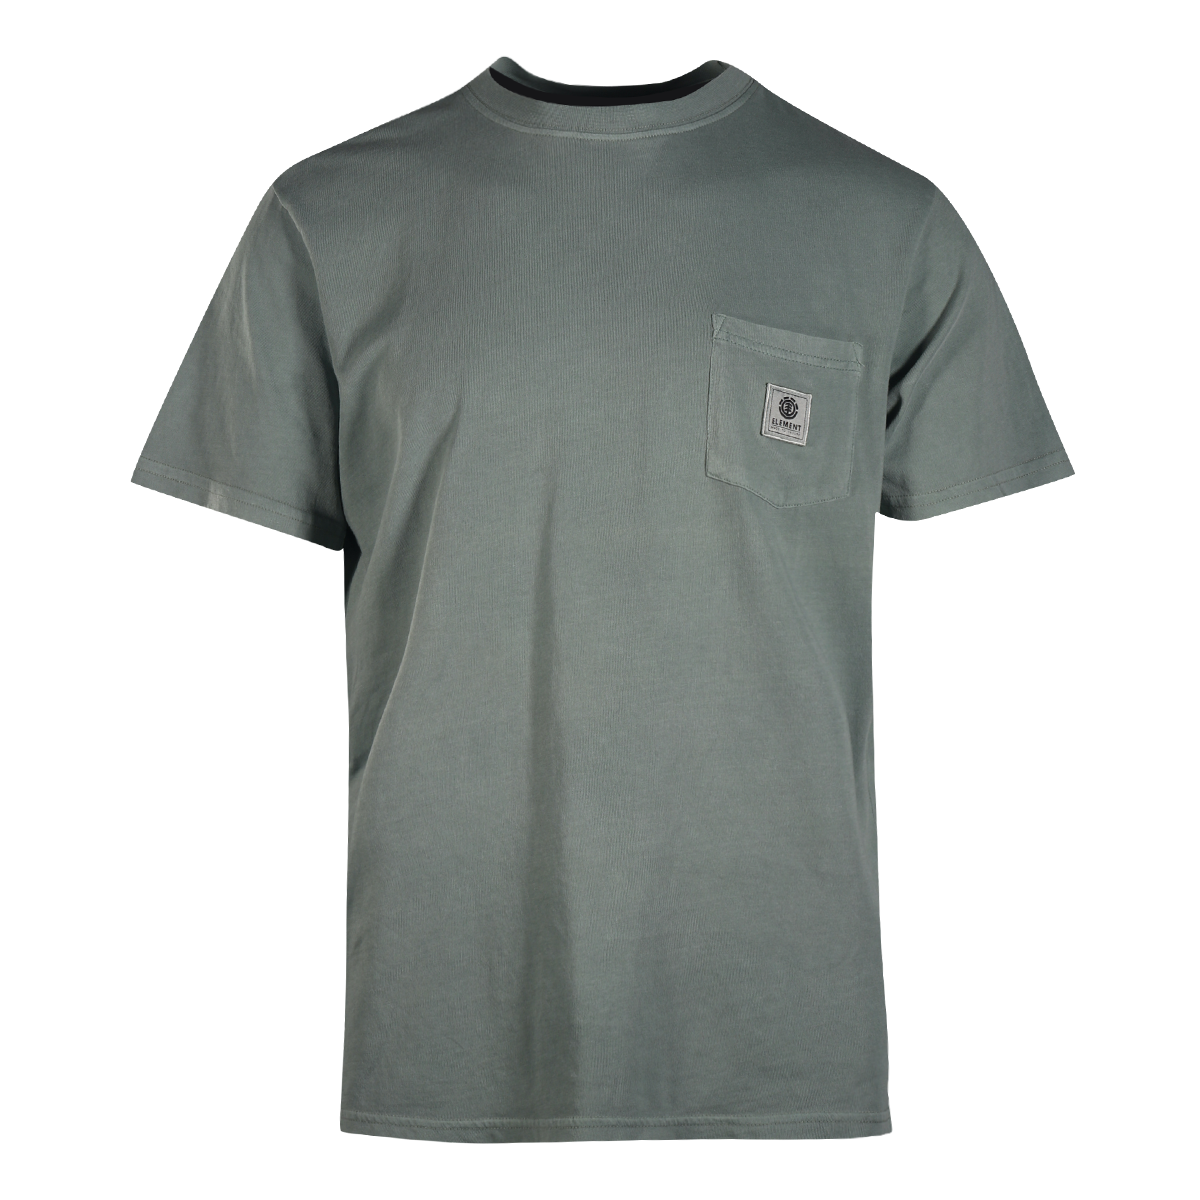 Primary image for Element Men's T-Shirt Mineral Green Basic Pocket Tee S/S (S04)